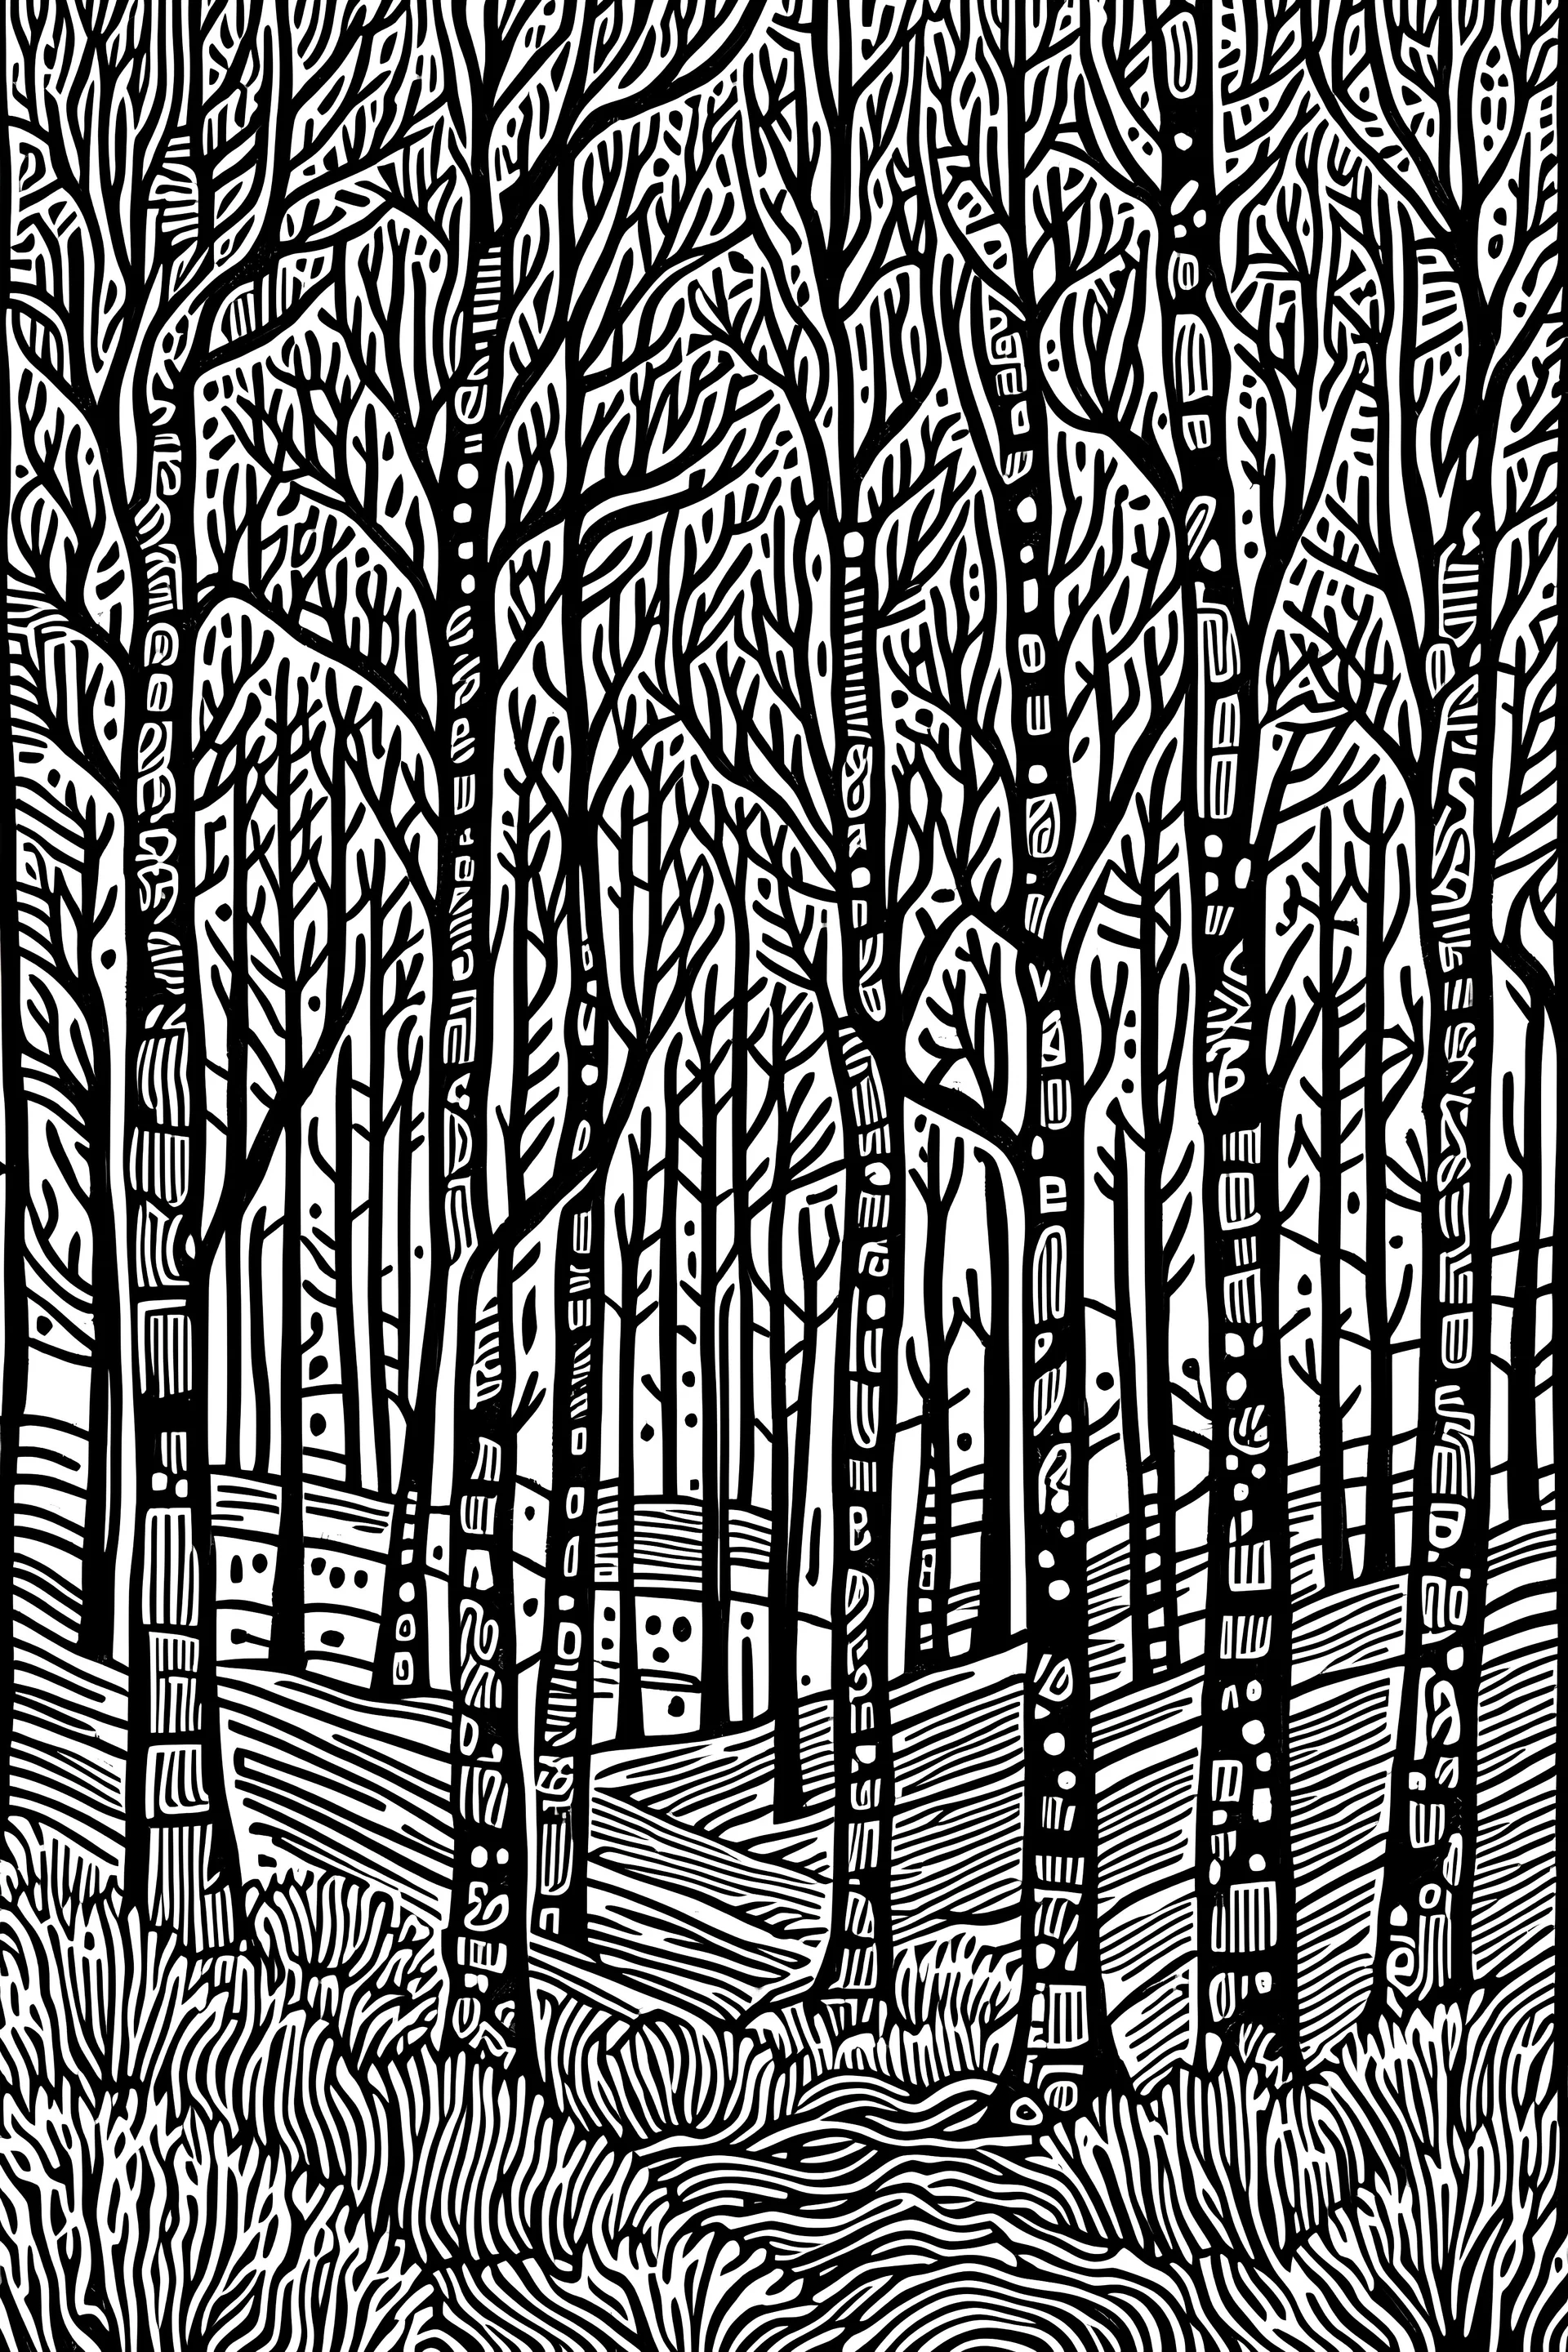 Forest at night linocut, black and white, in the style of van gogh